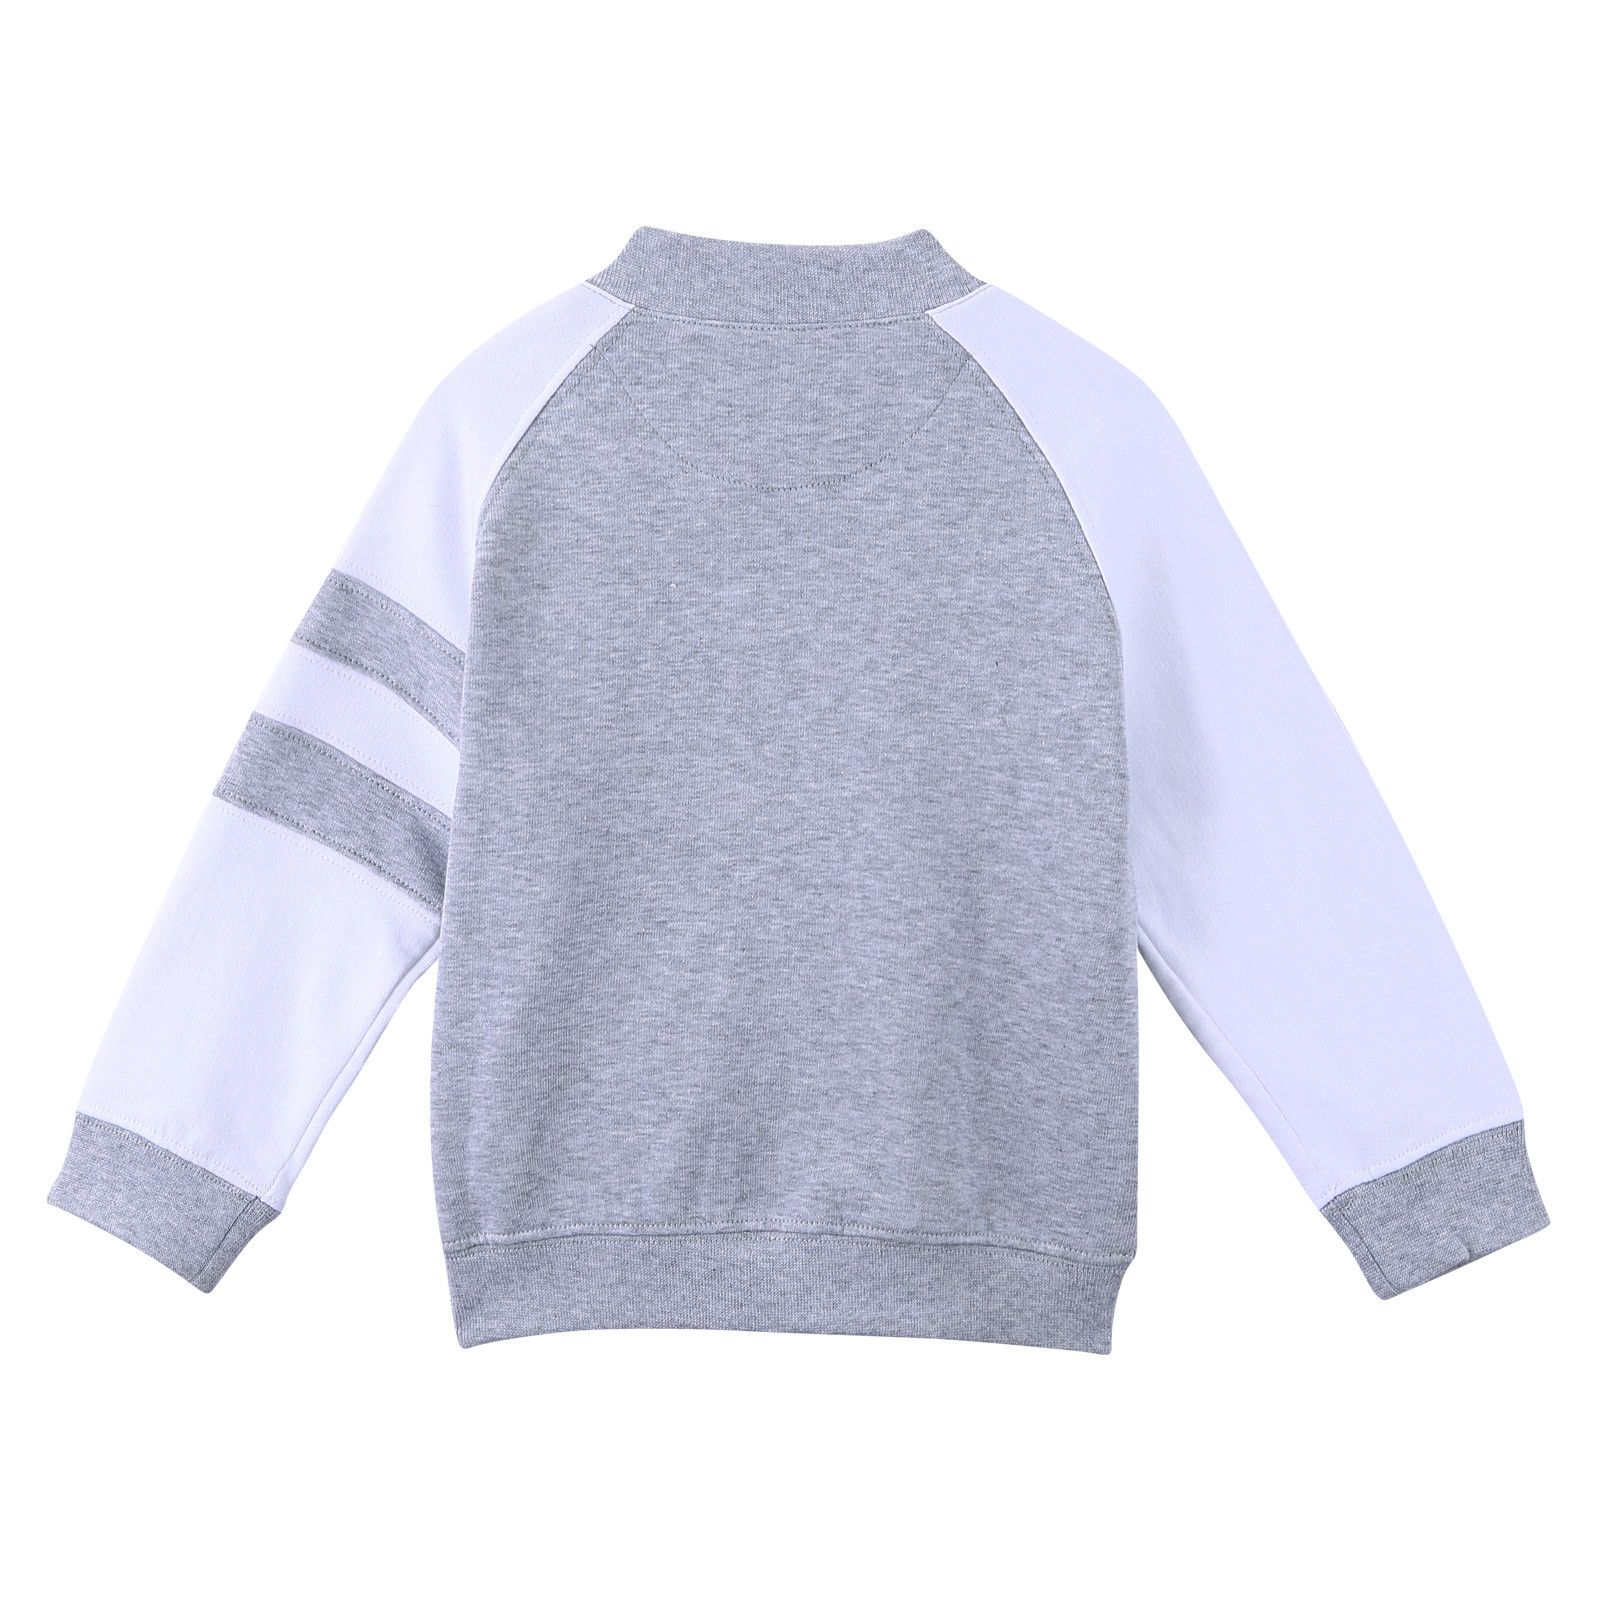 Boys Grey Cotton Knitted Jacket With Stripe Trims - CÉMAROSE | Children's Fashion Store - 2